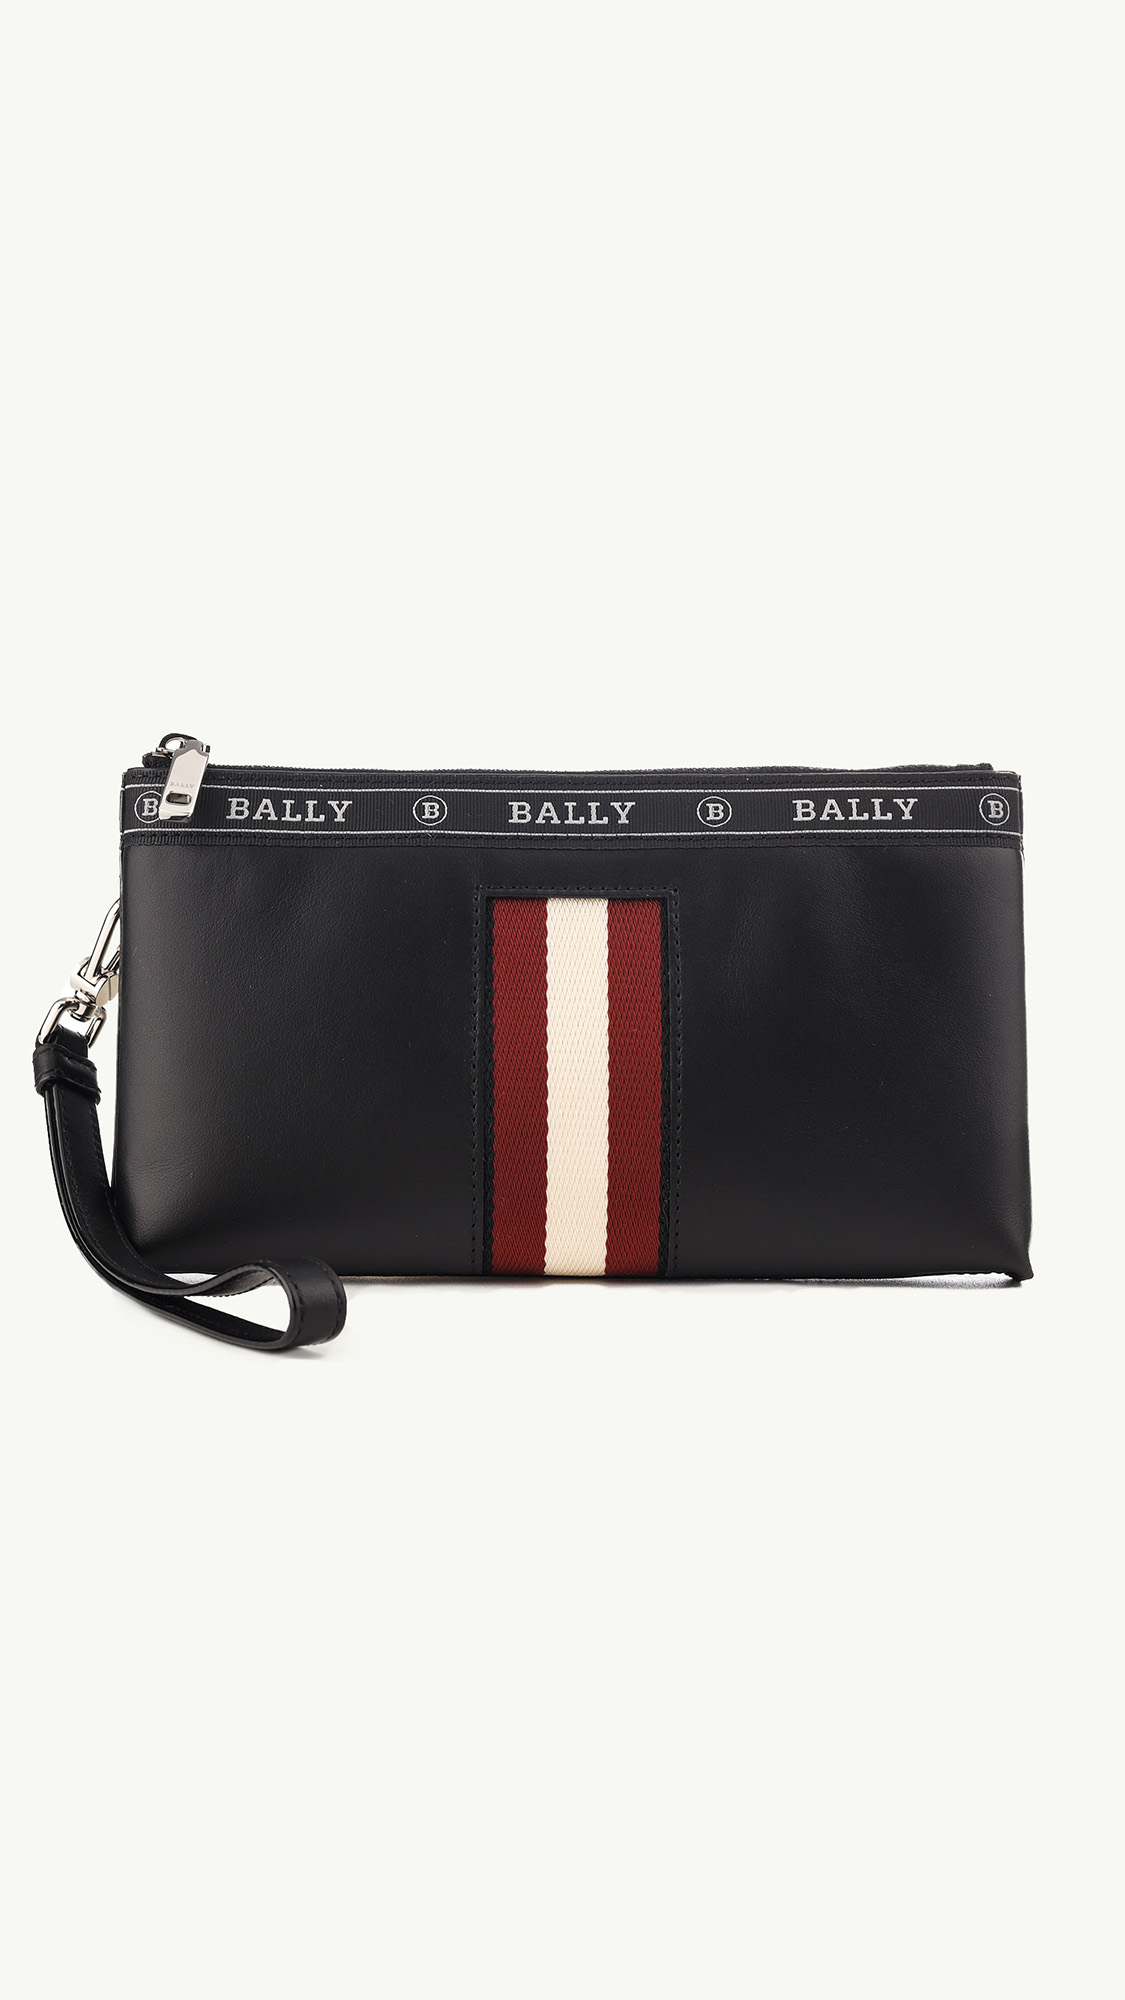 BALLY Beryer Phone Wallet in Black Bovine Leather with Red/White Stripe 0